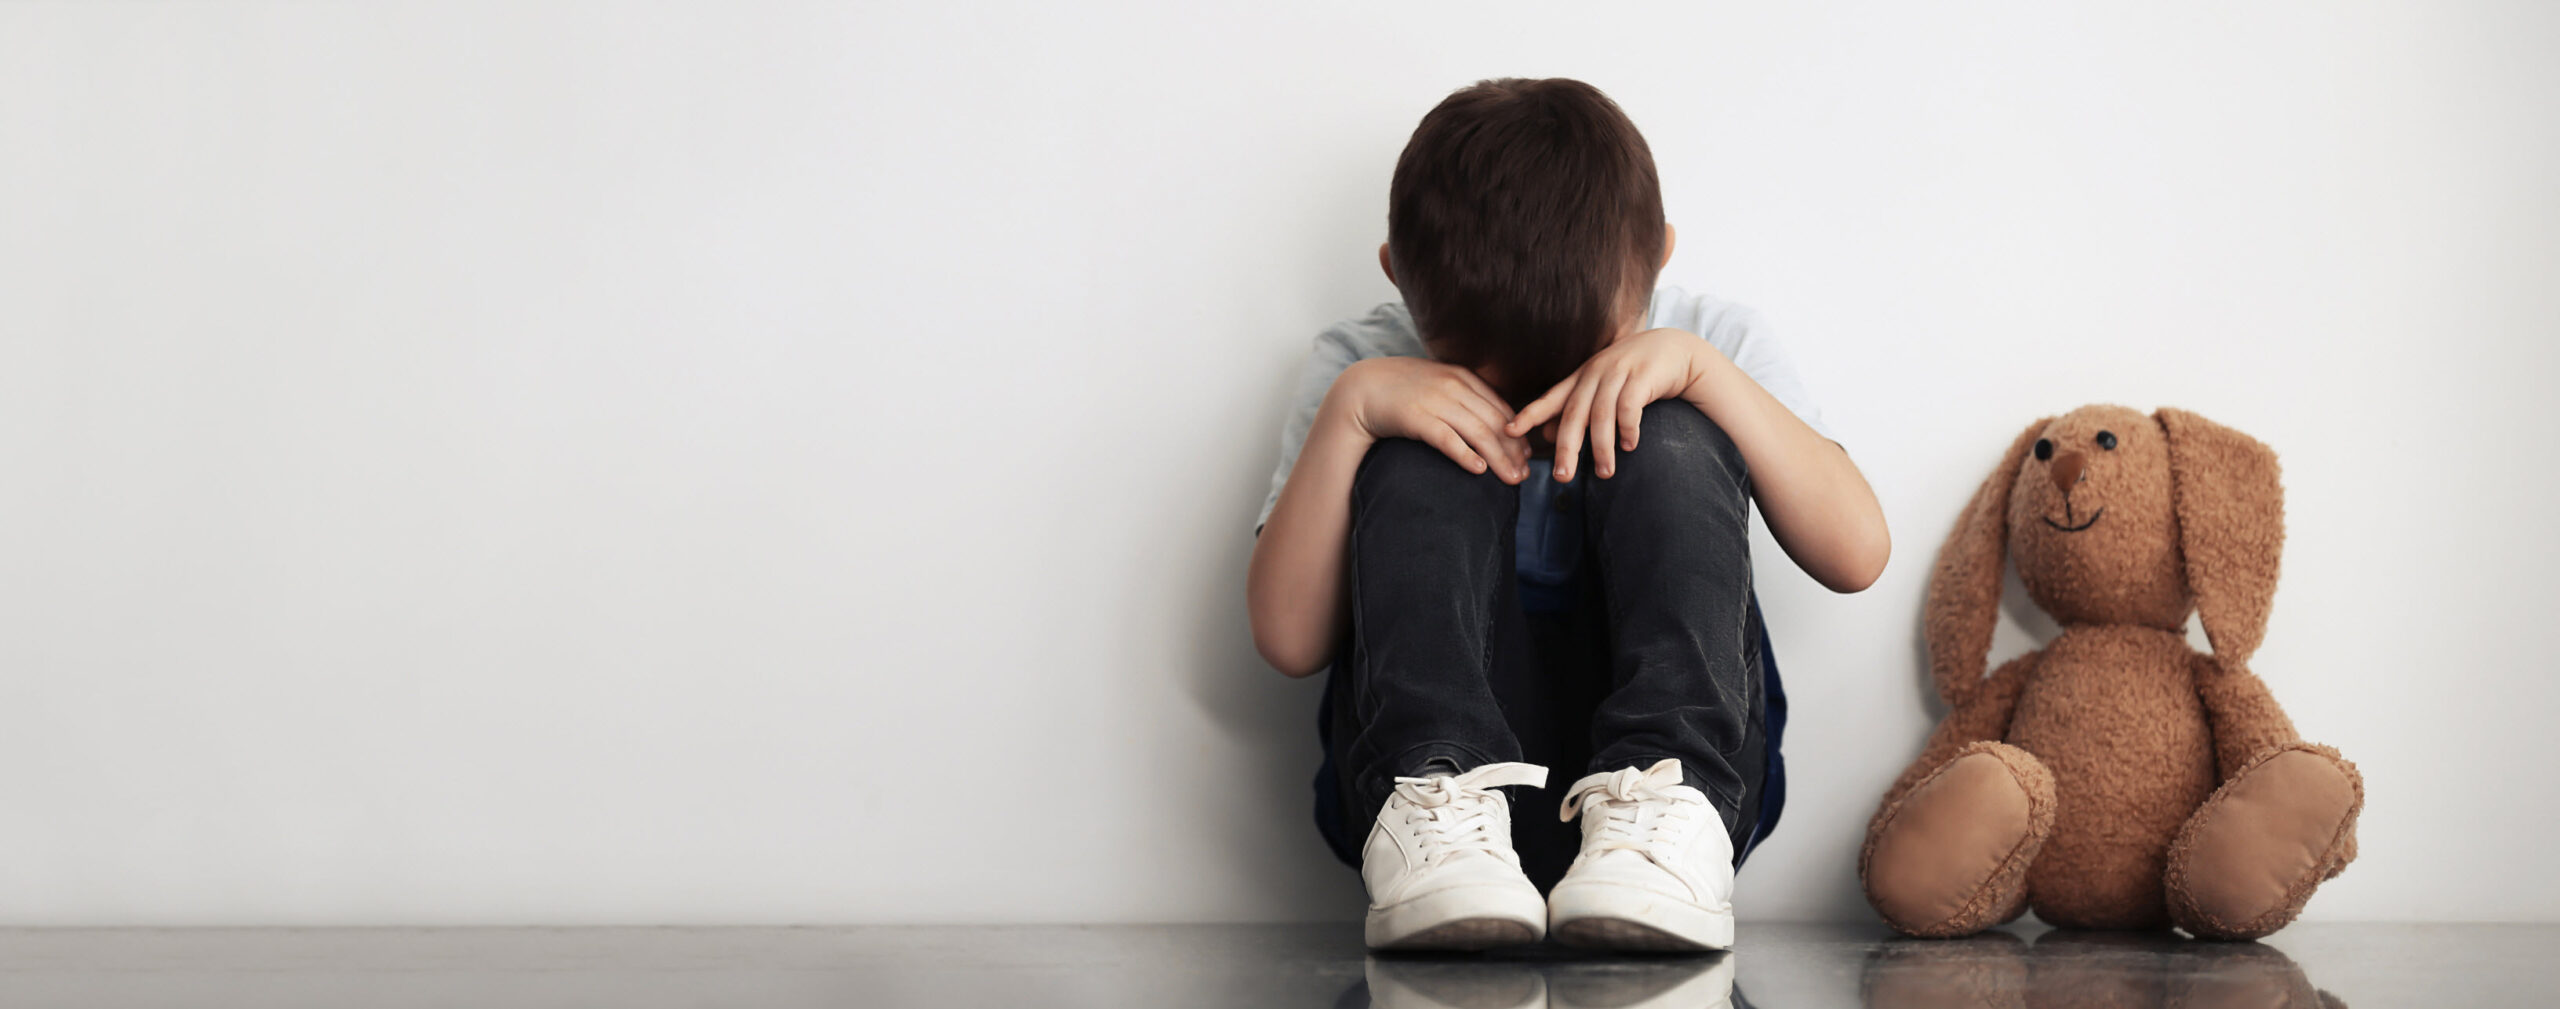 Why we need to talk about child sexual abuse